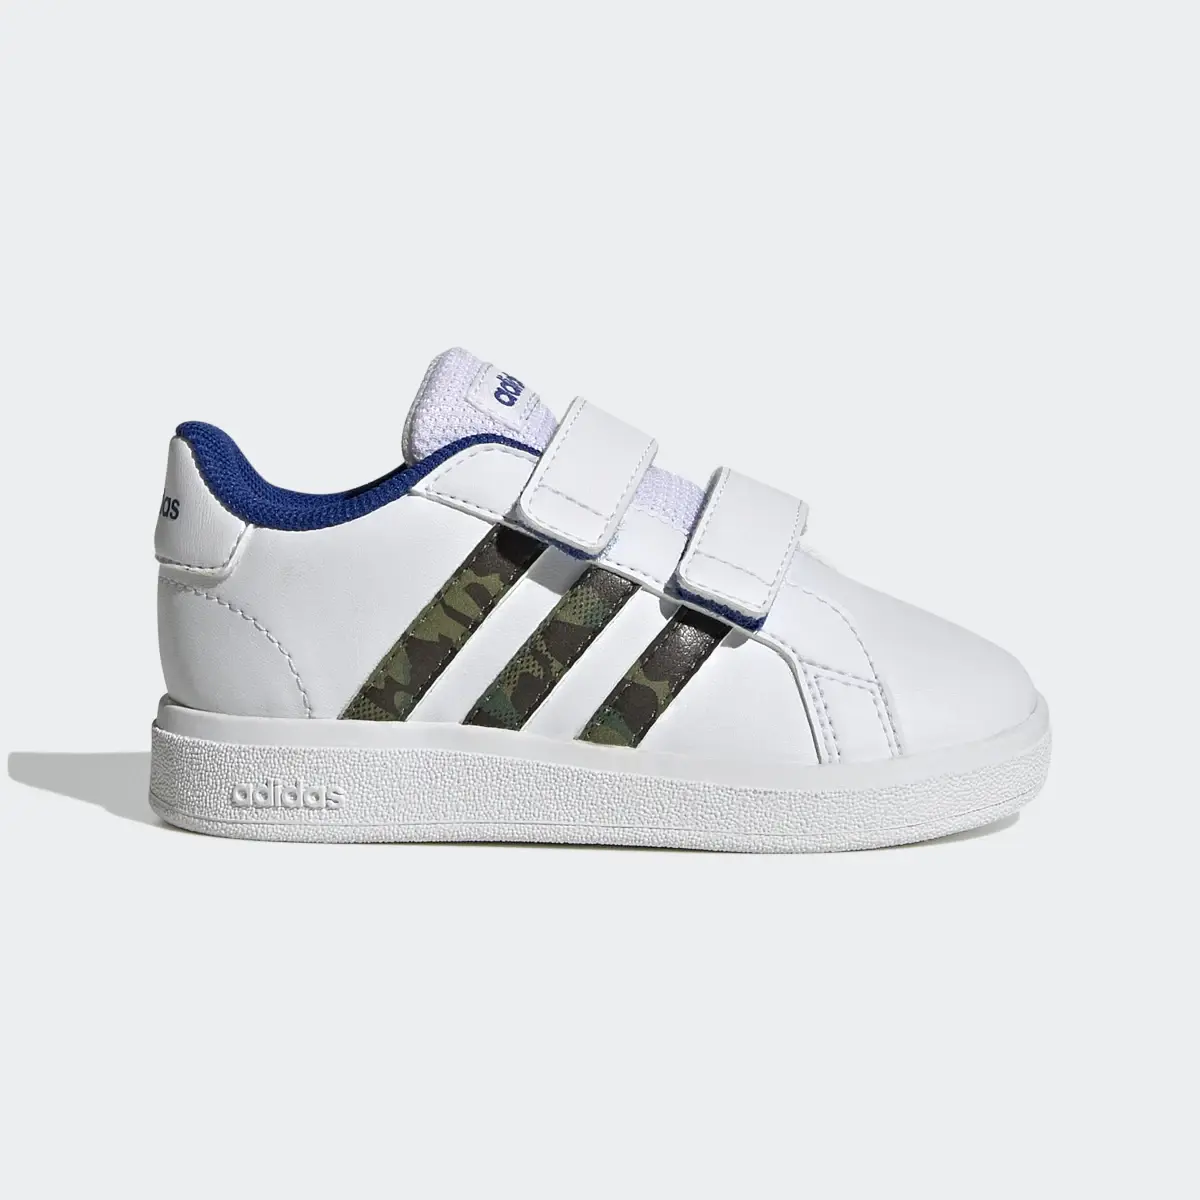 Adidas Grand Court Lifestyle Hook and Loop Shoes. 2